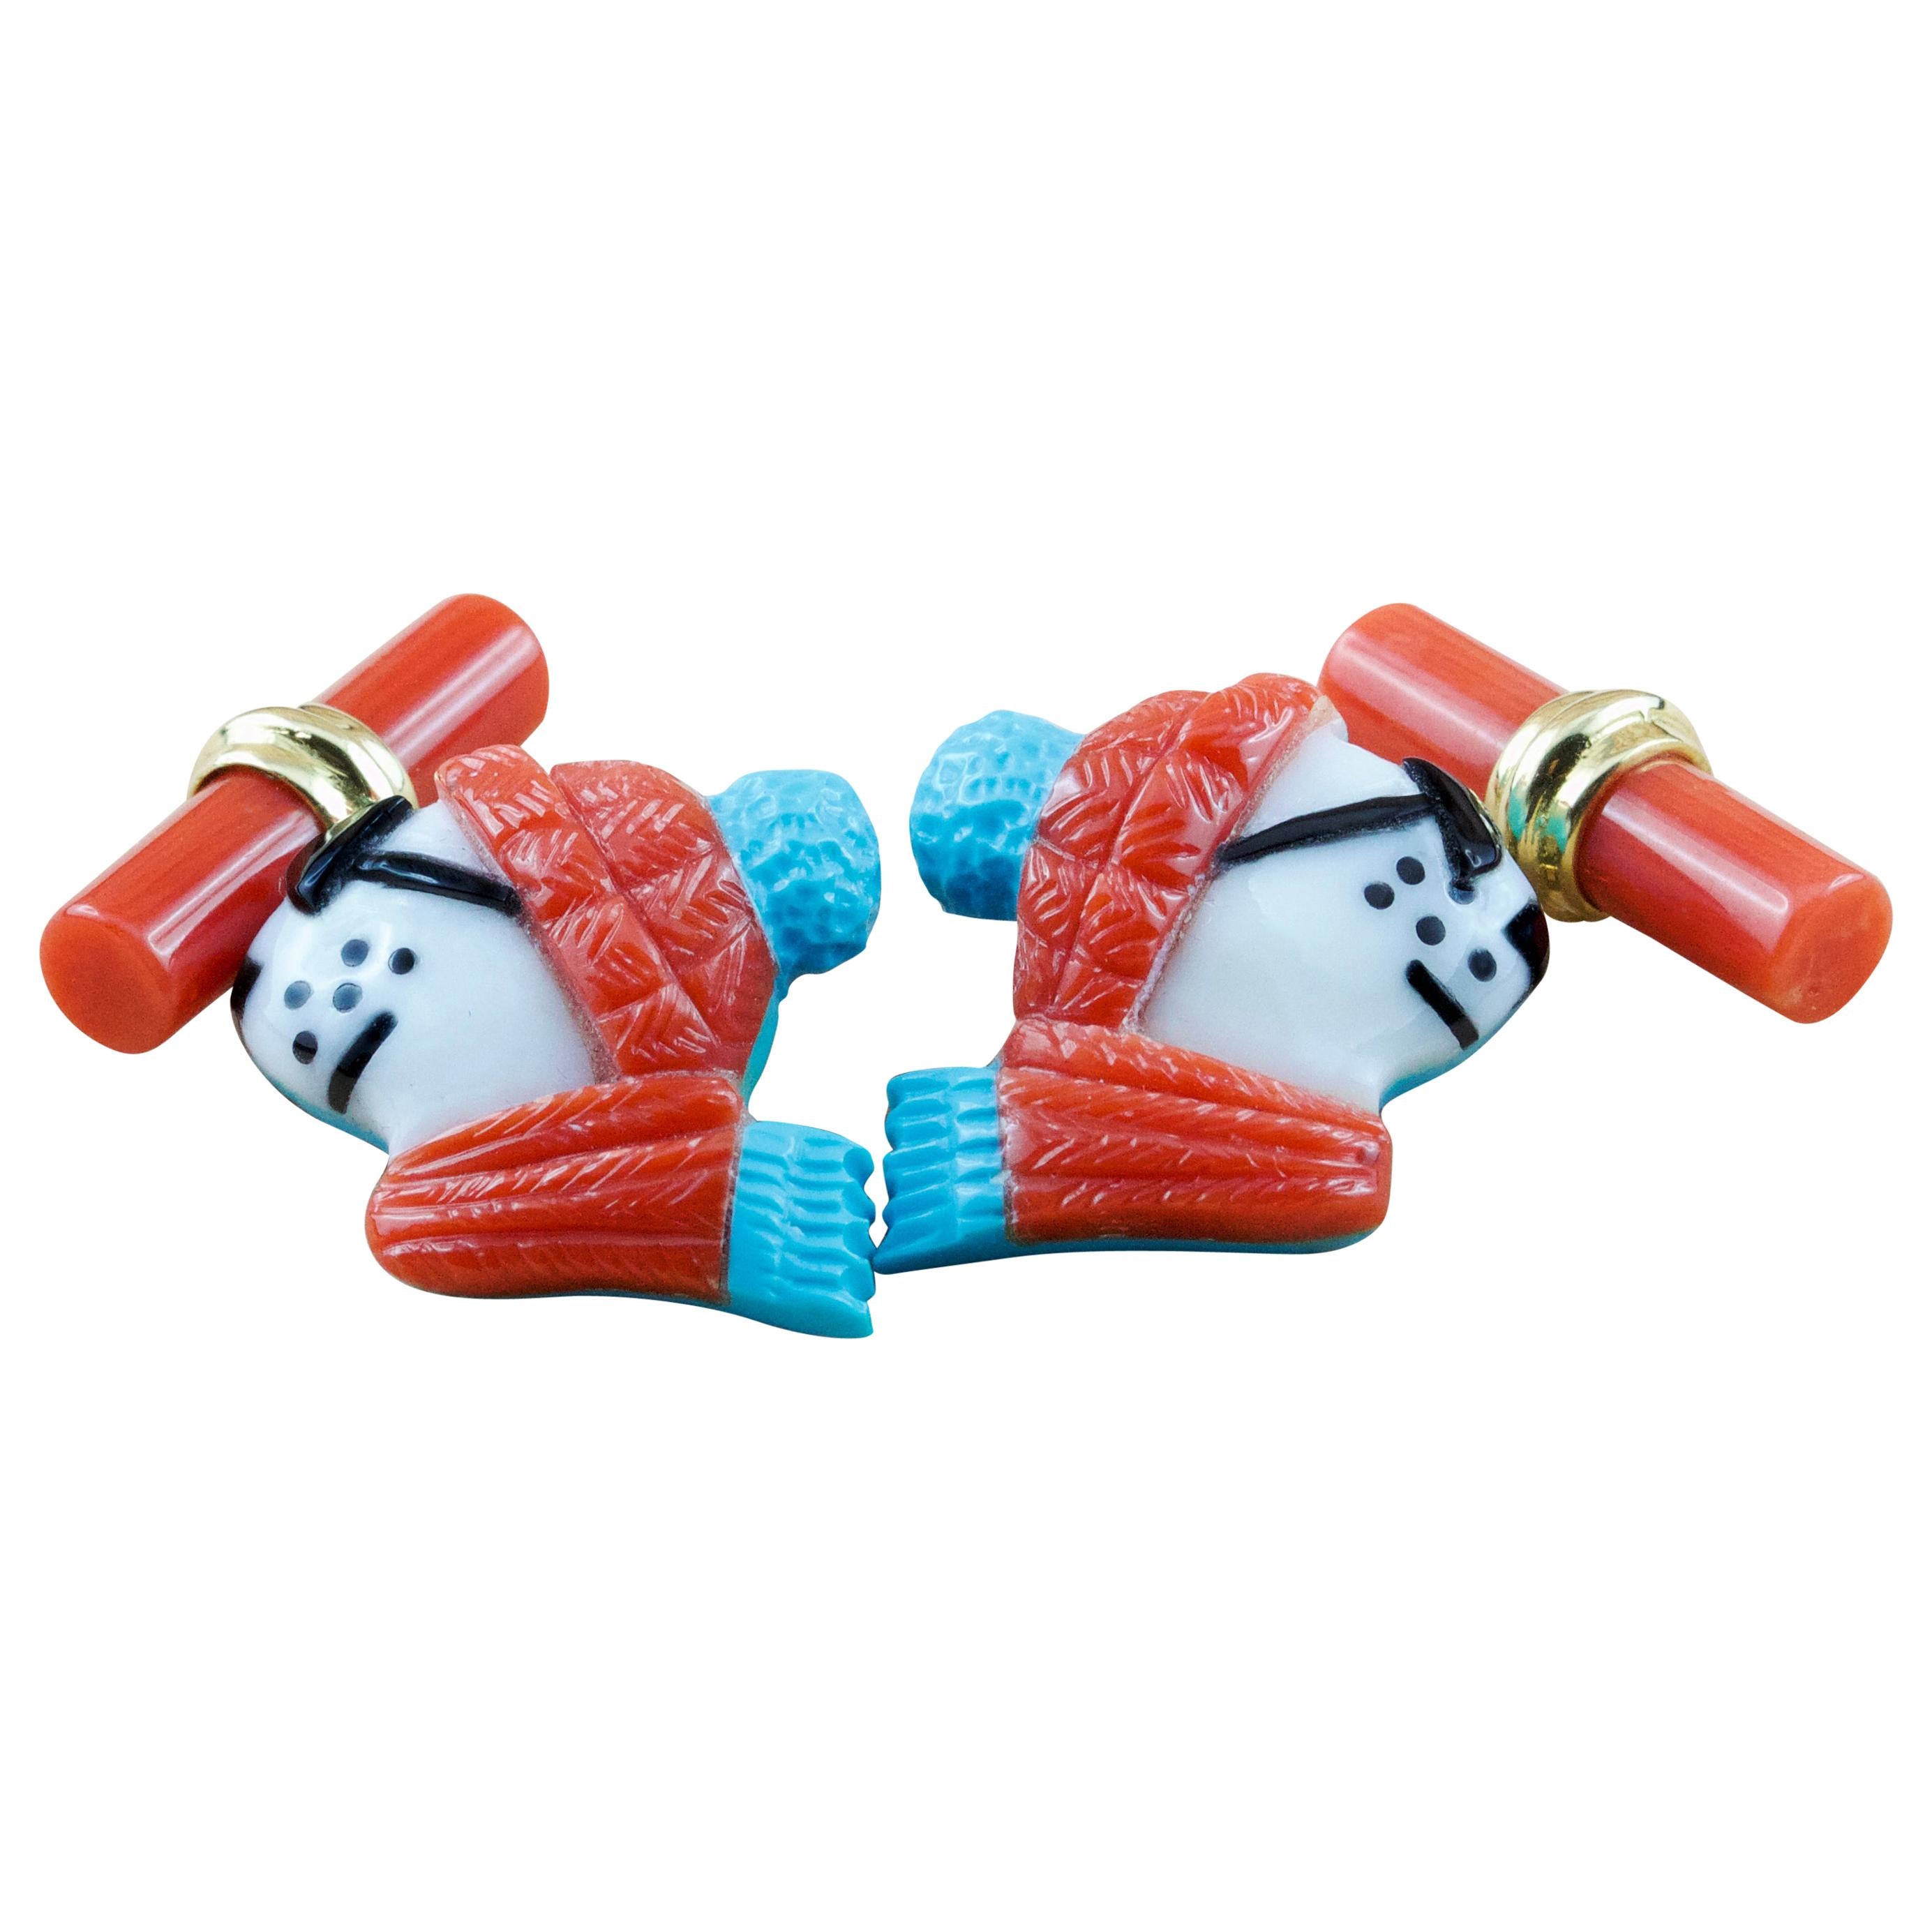 This playful pair of cufflinks depicts the profile of a polar bear portrayed as if dressed up for the winter with sunglasses, scarf, and hat. 
The animal is made of Mediterranean coral which is also used to make the cylindrical toggle, accents in